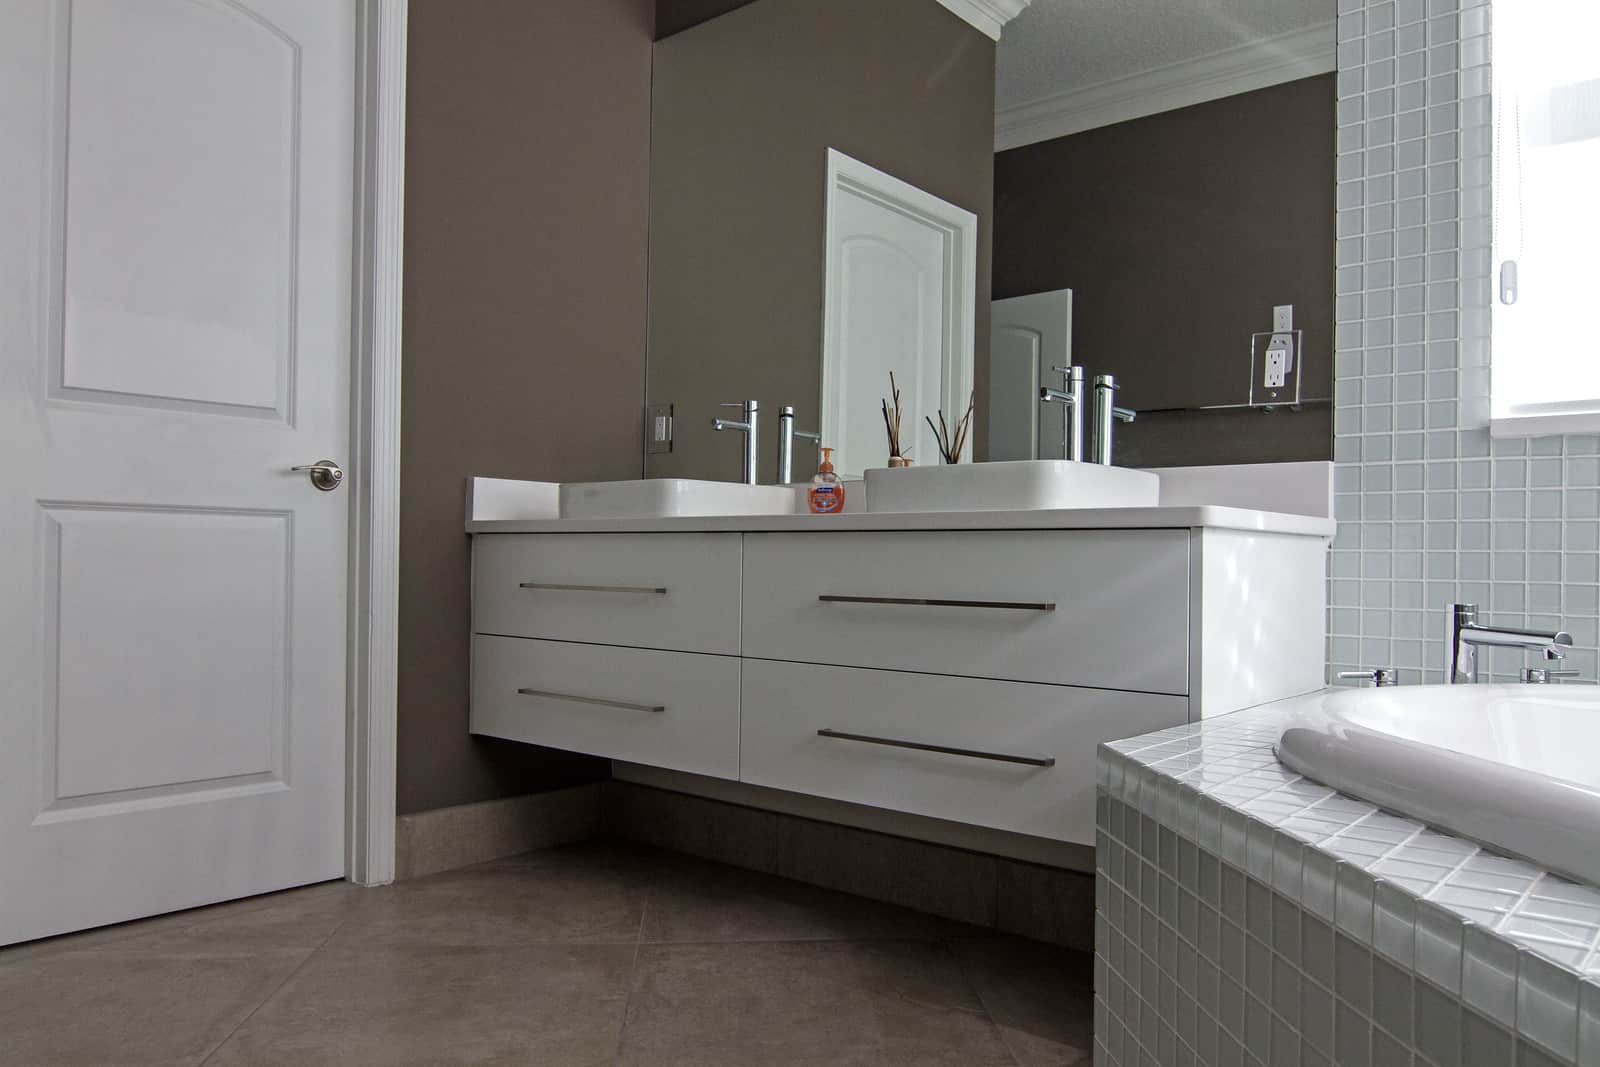 mccabinet bathroom with stunning white cabinetry